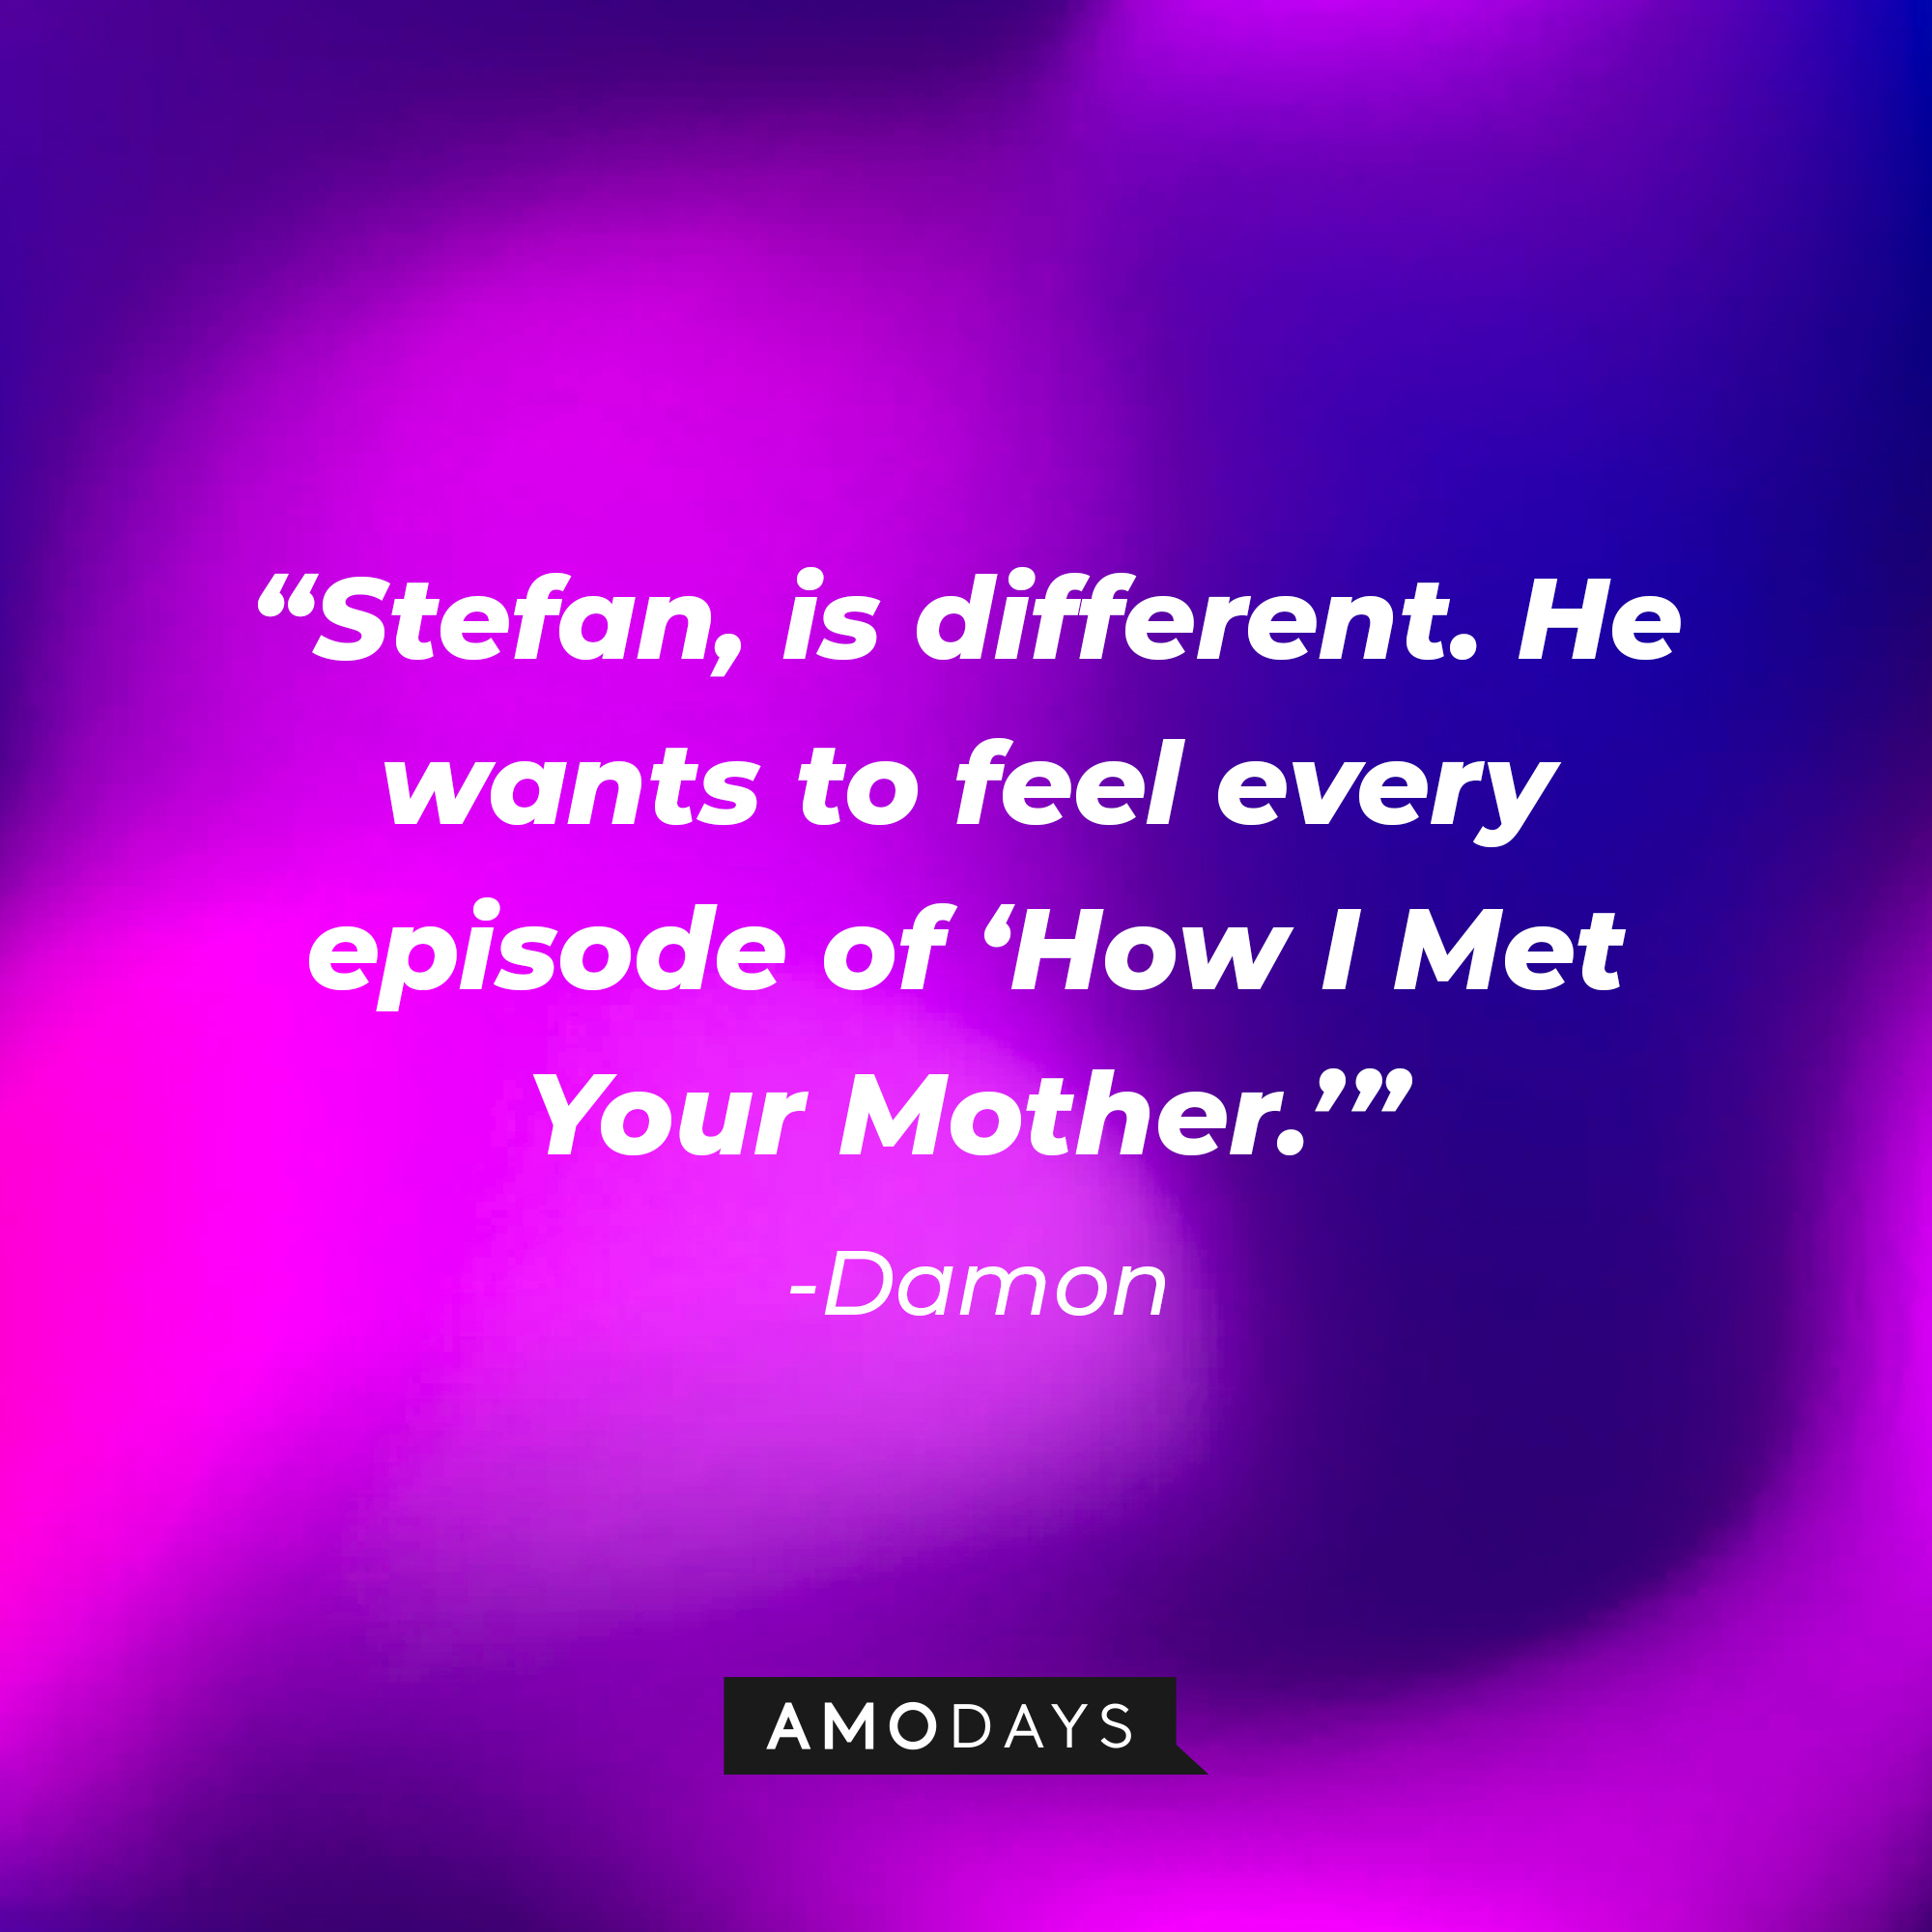 Damon's quote: "Stefan, is different. He wants to feel every episode of 'How I Met Your Mother.'" | Source: Amodays